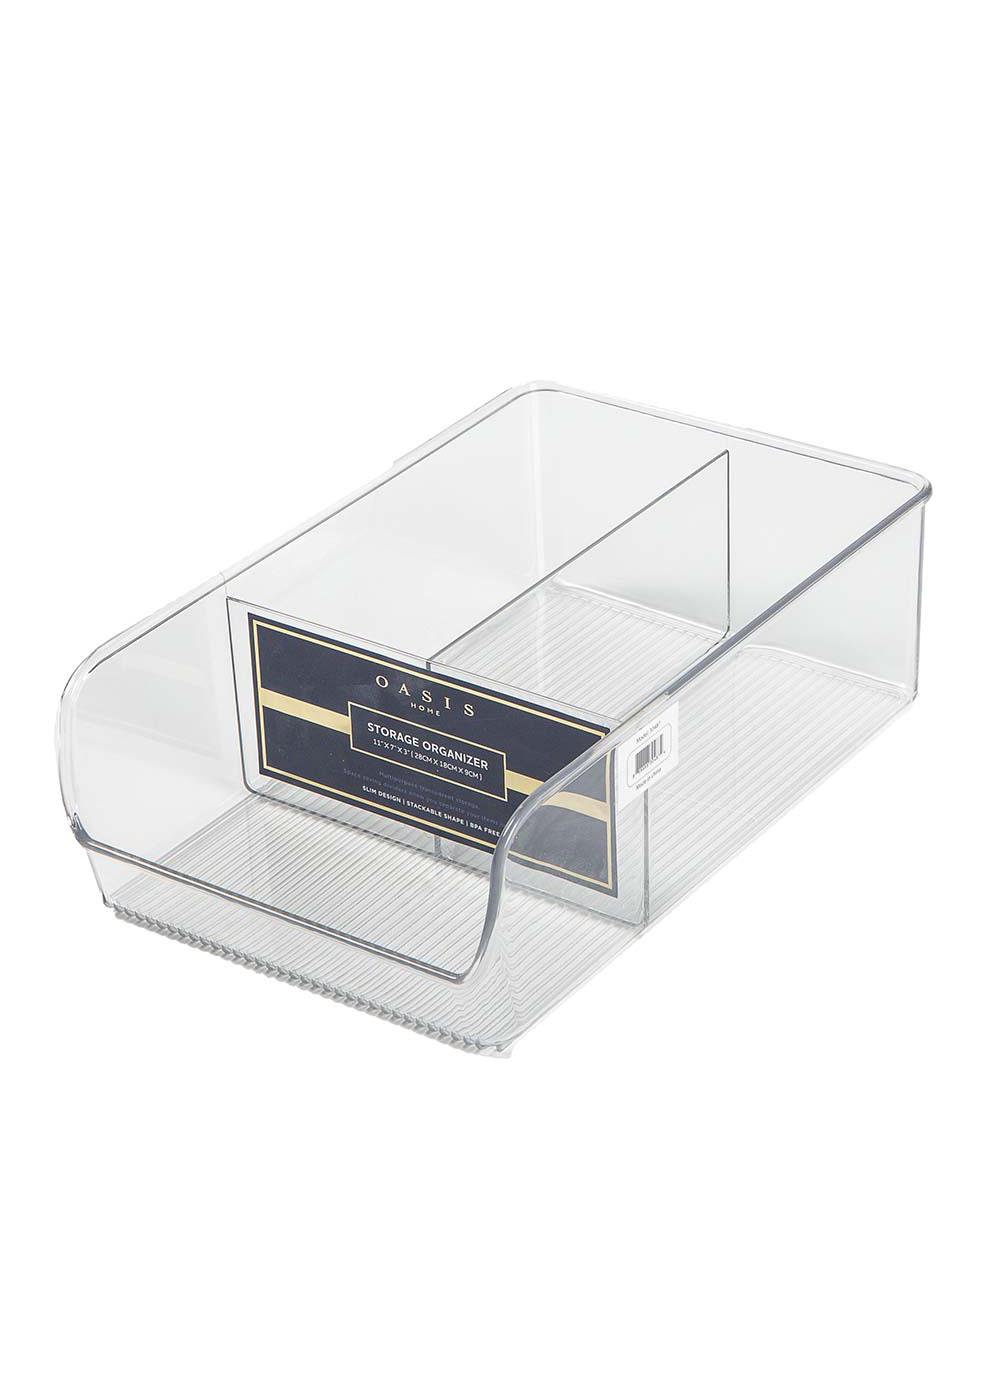 Oasis Home Three-Compartment Storage Organizer; image 2 of 2